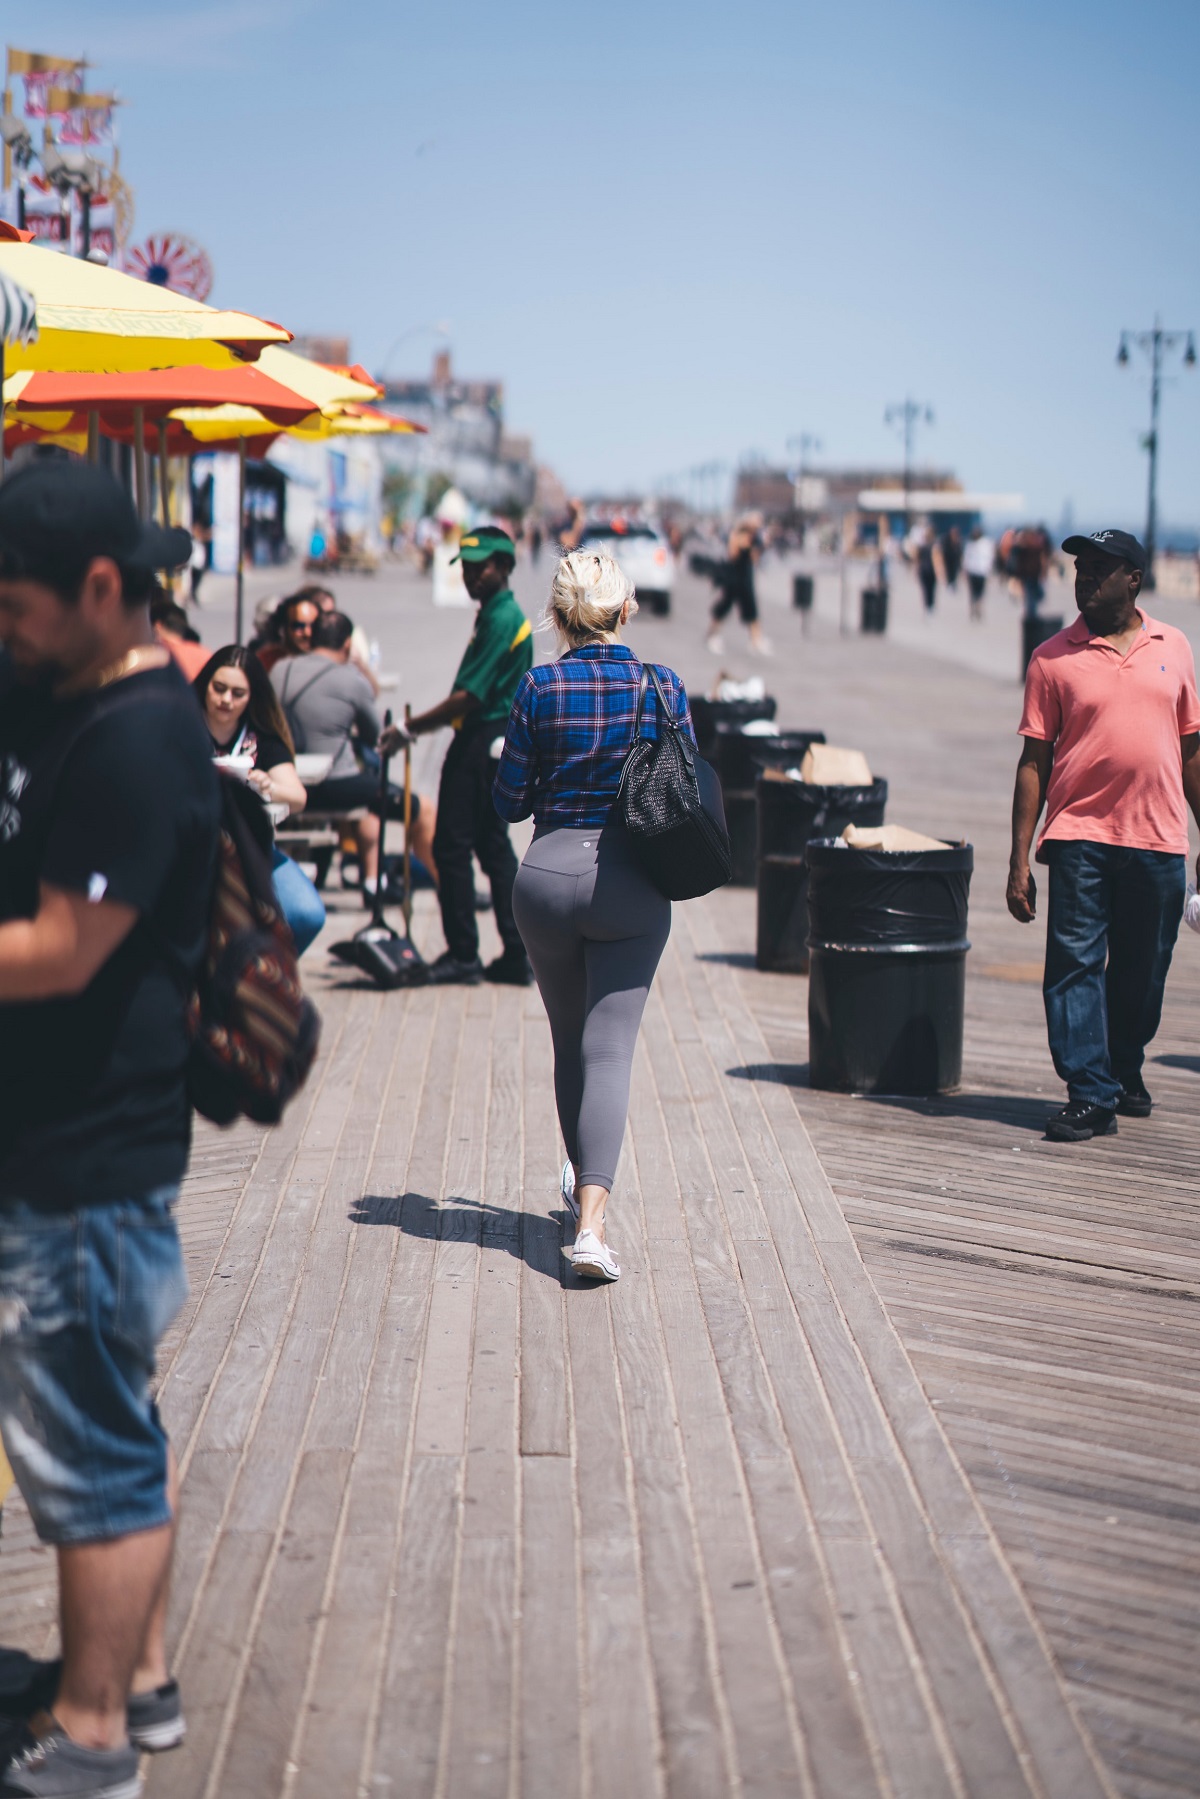 Young woman with large bag walks down a boardwalk with many people in the hot sun